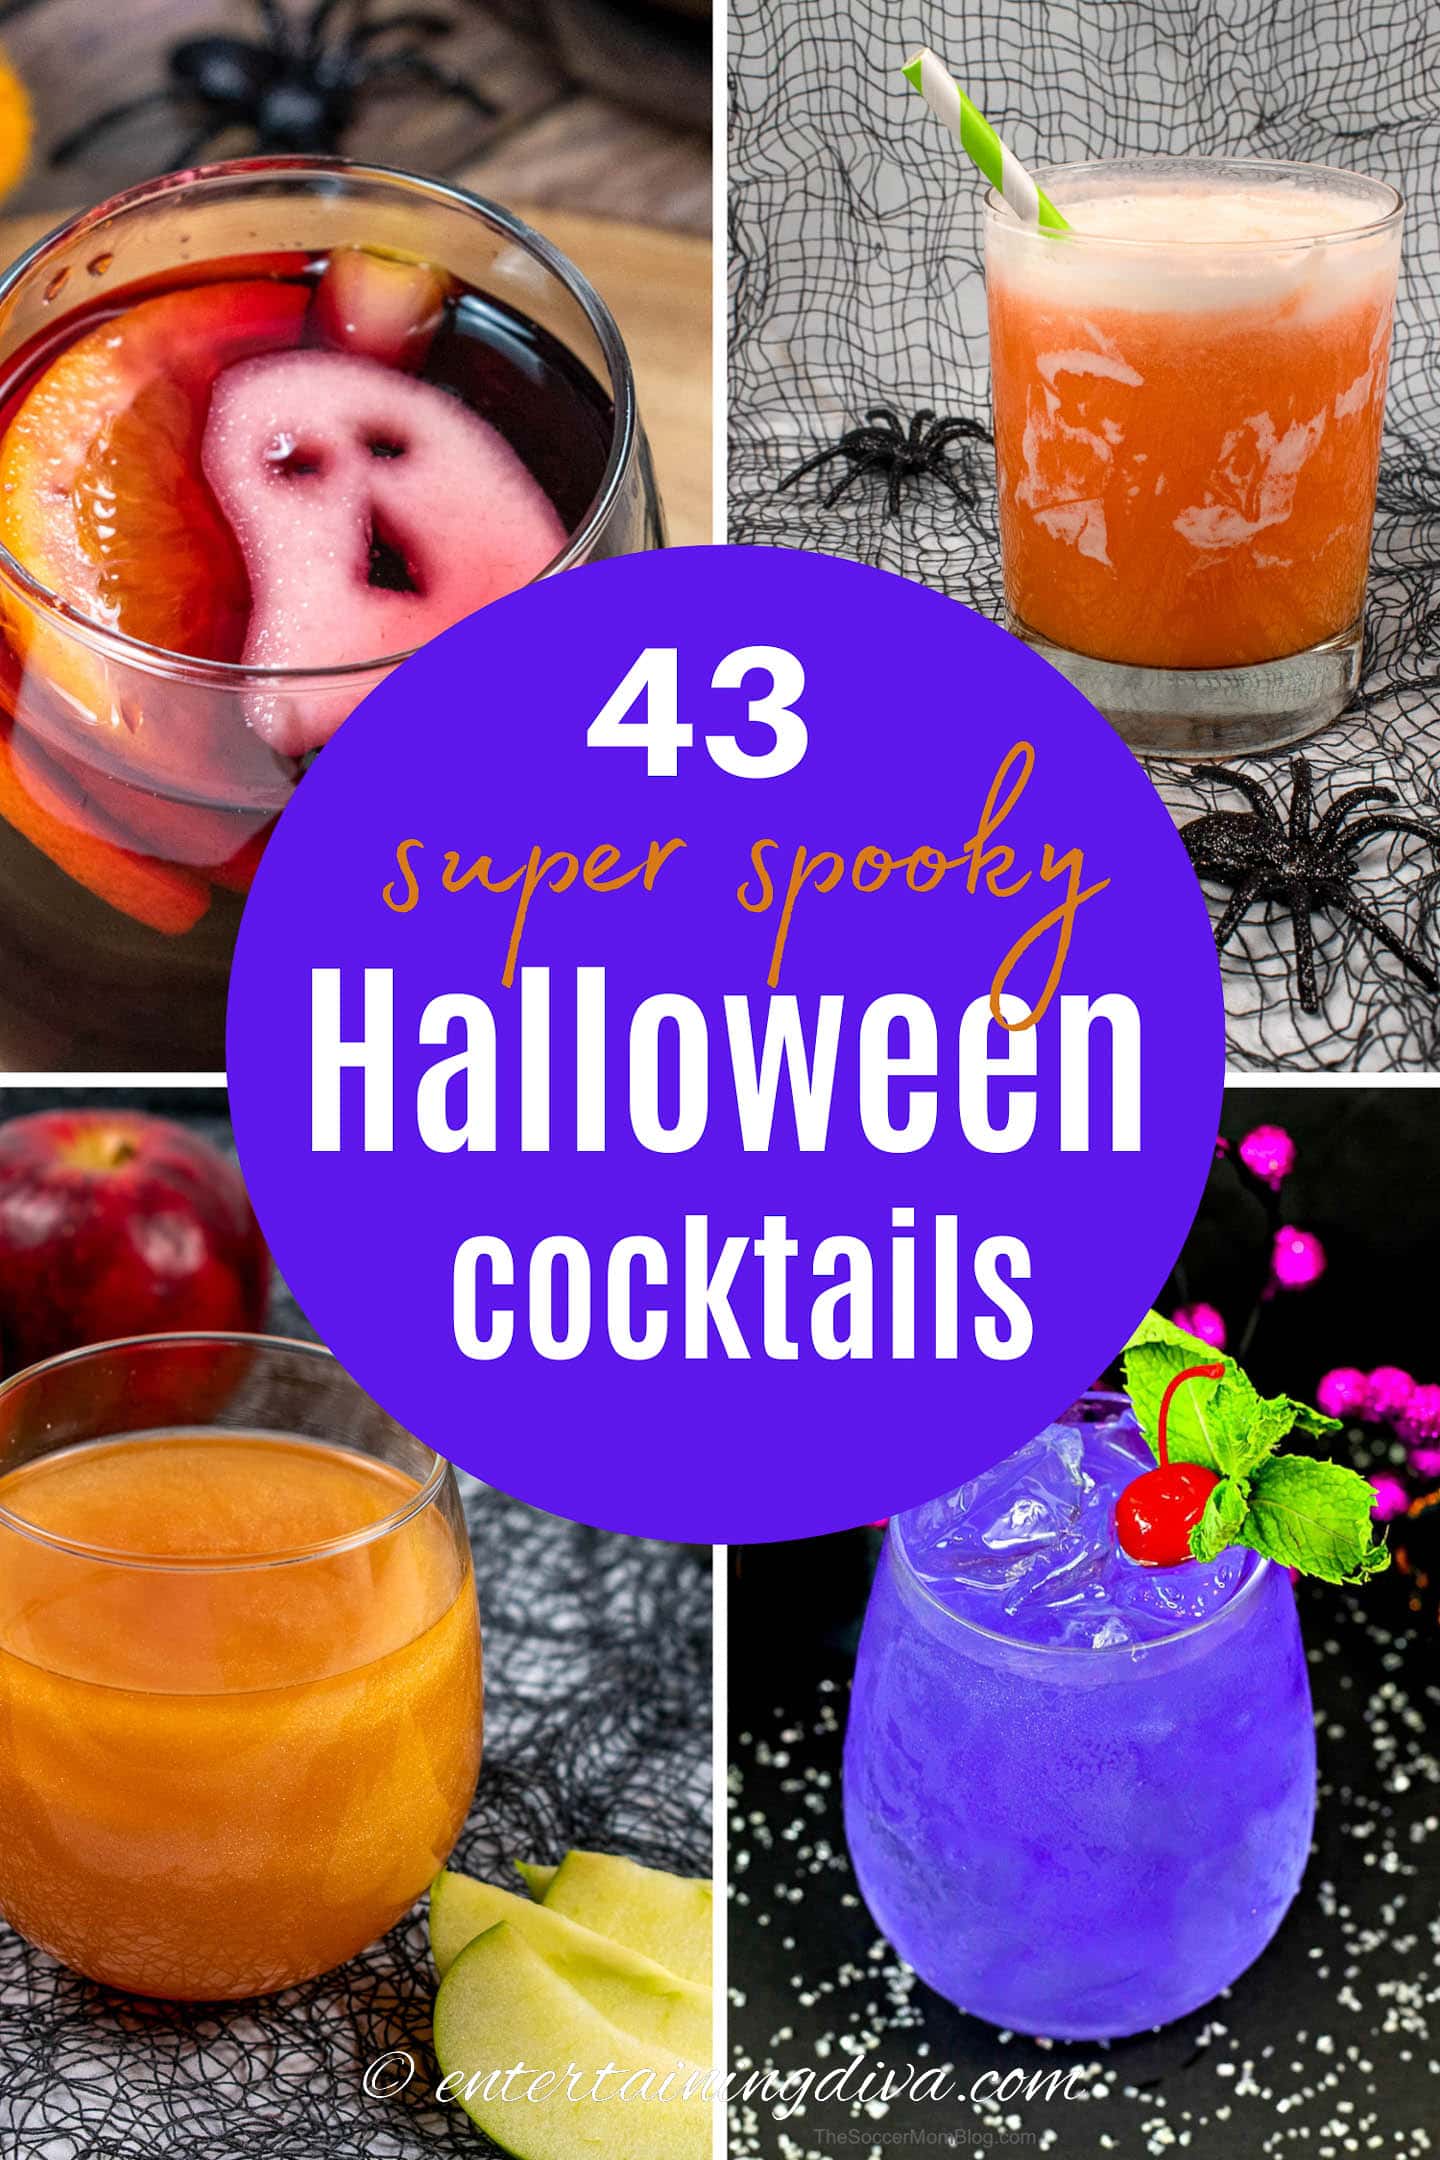 Super spooky Halloween cocktail recipes